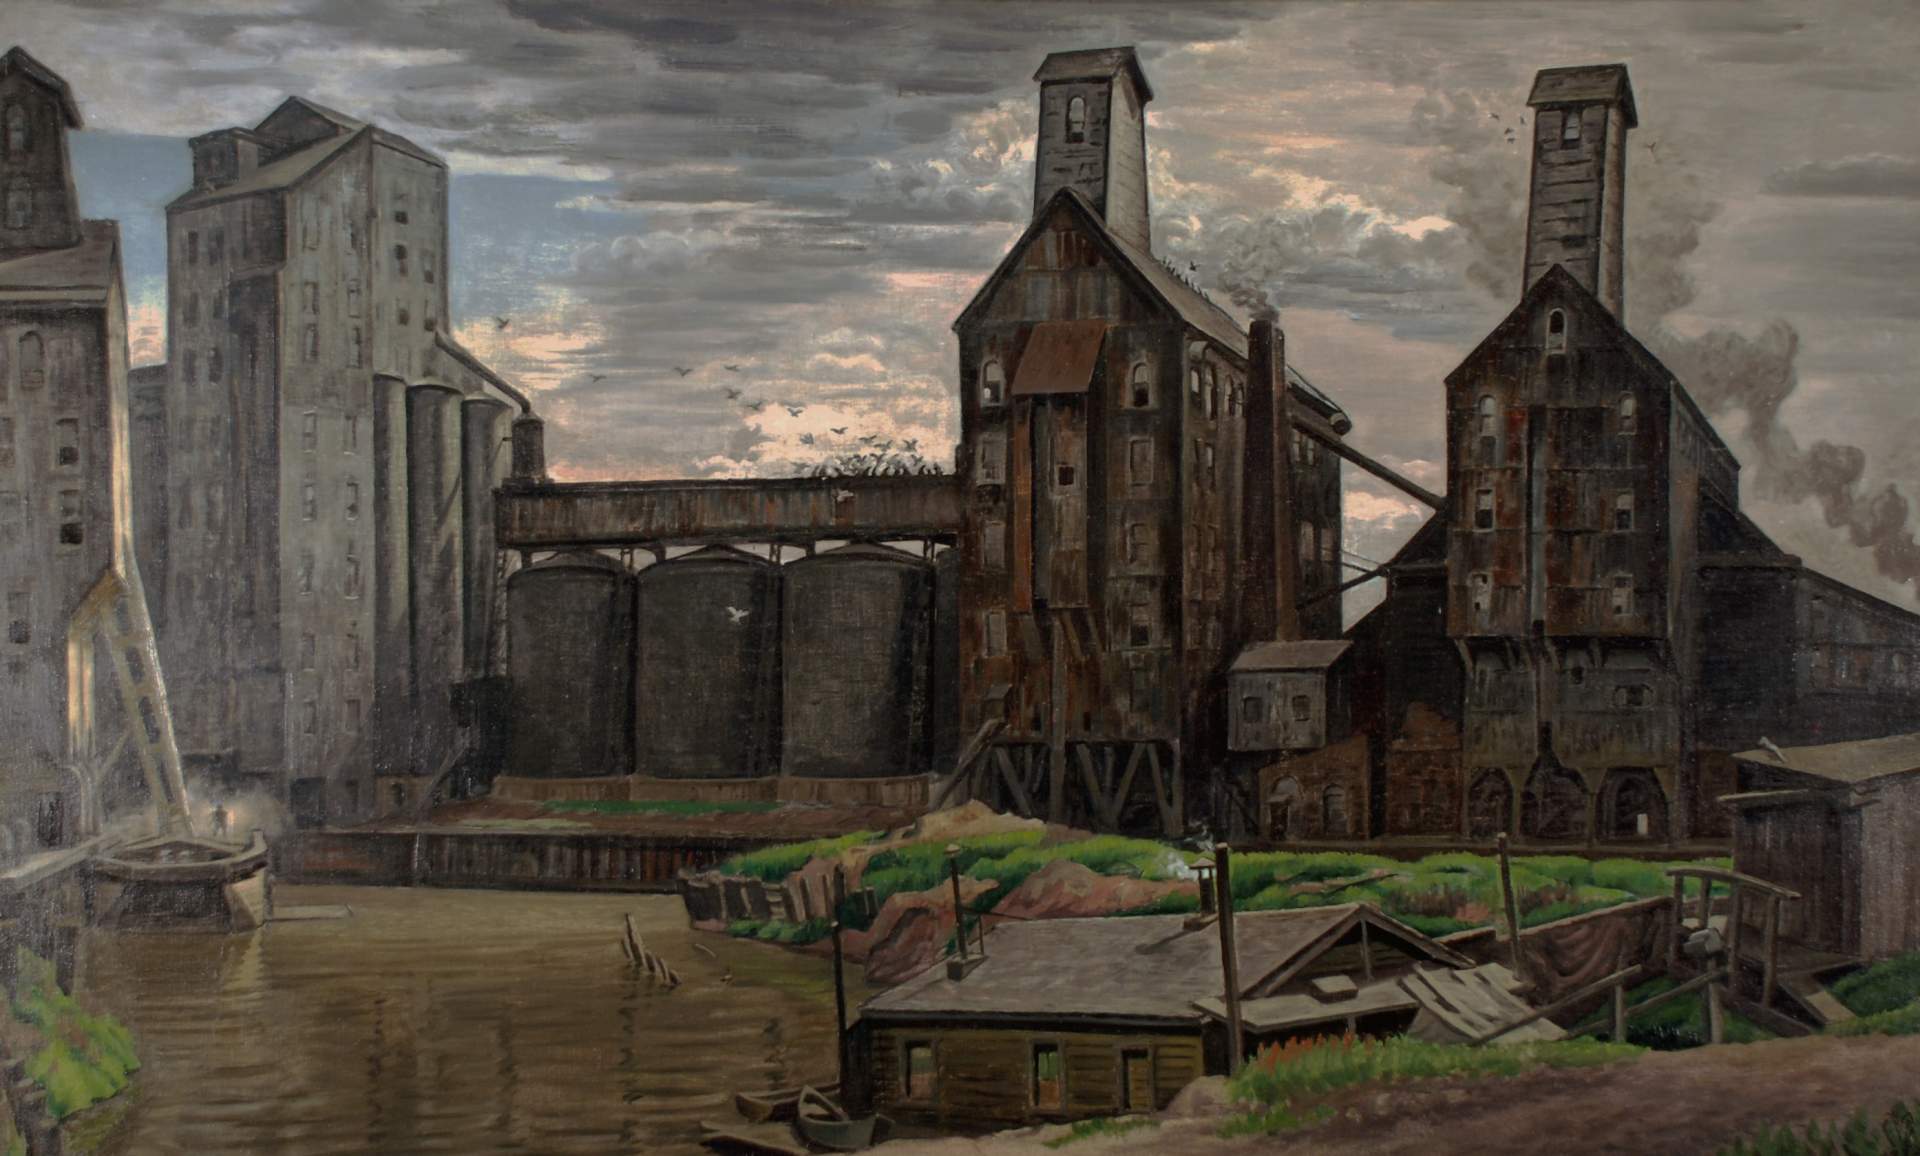 Centerfold: Charles Burchfield at the Burchfield Penney